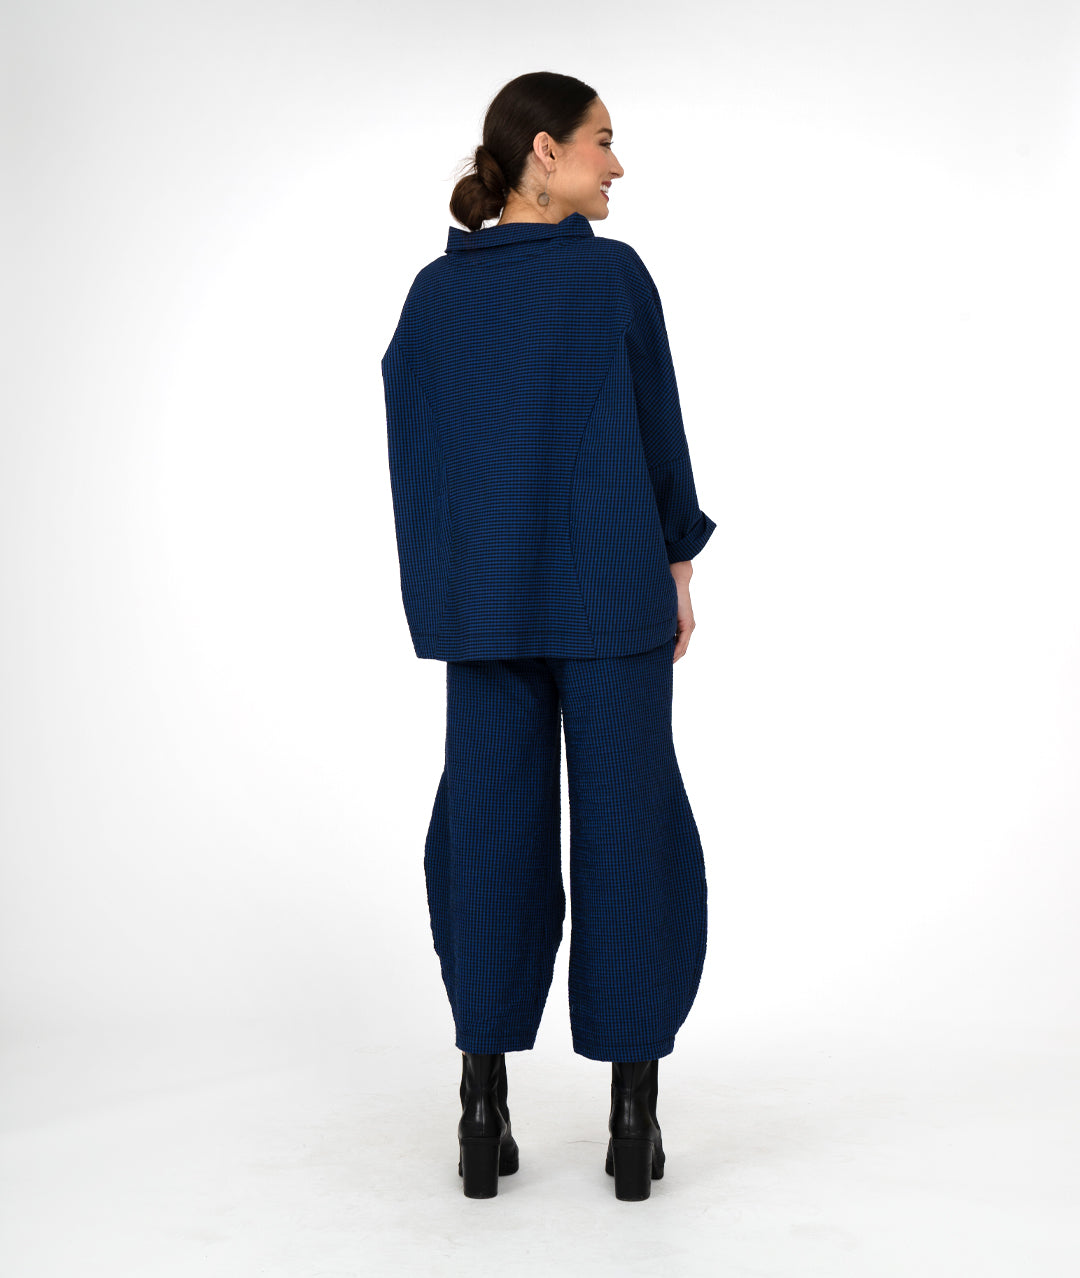 model in a black and blue striped wide leg pant, with a tuck detail at the ankles. Worn with a matching boxy top with a cowl neckline and long sleeves